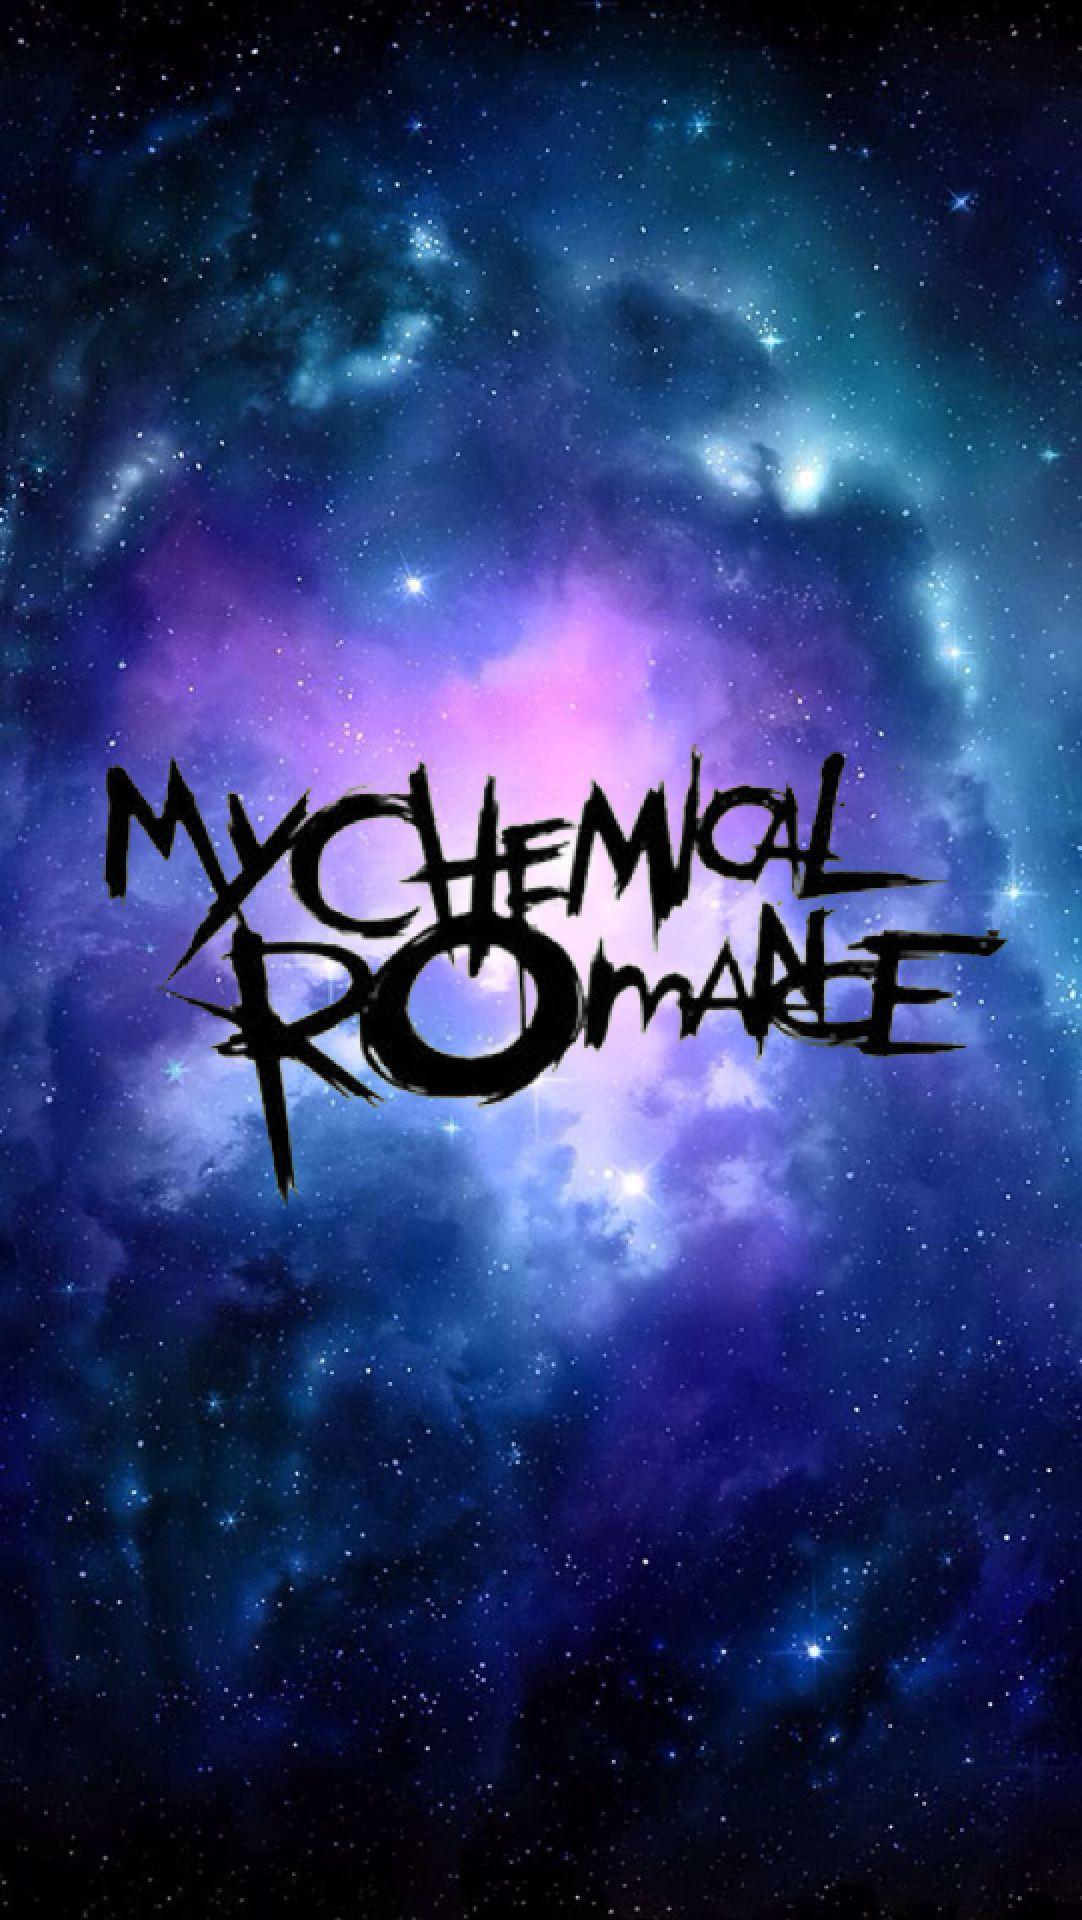 My Chemical Romance wallpaper for iPhone 5 that I made. Comment if